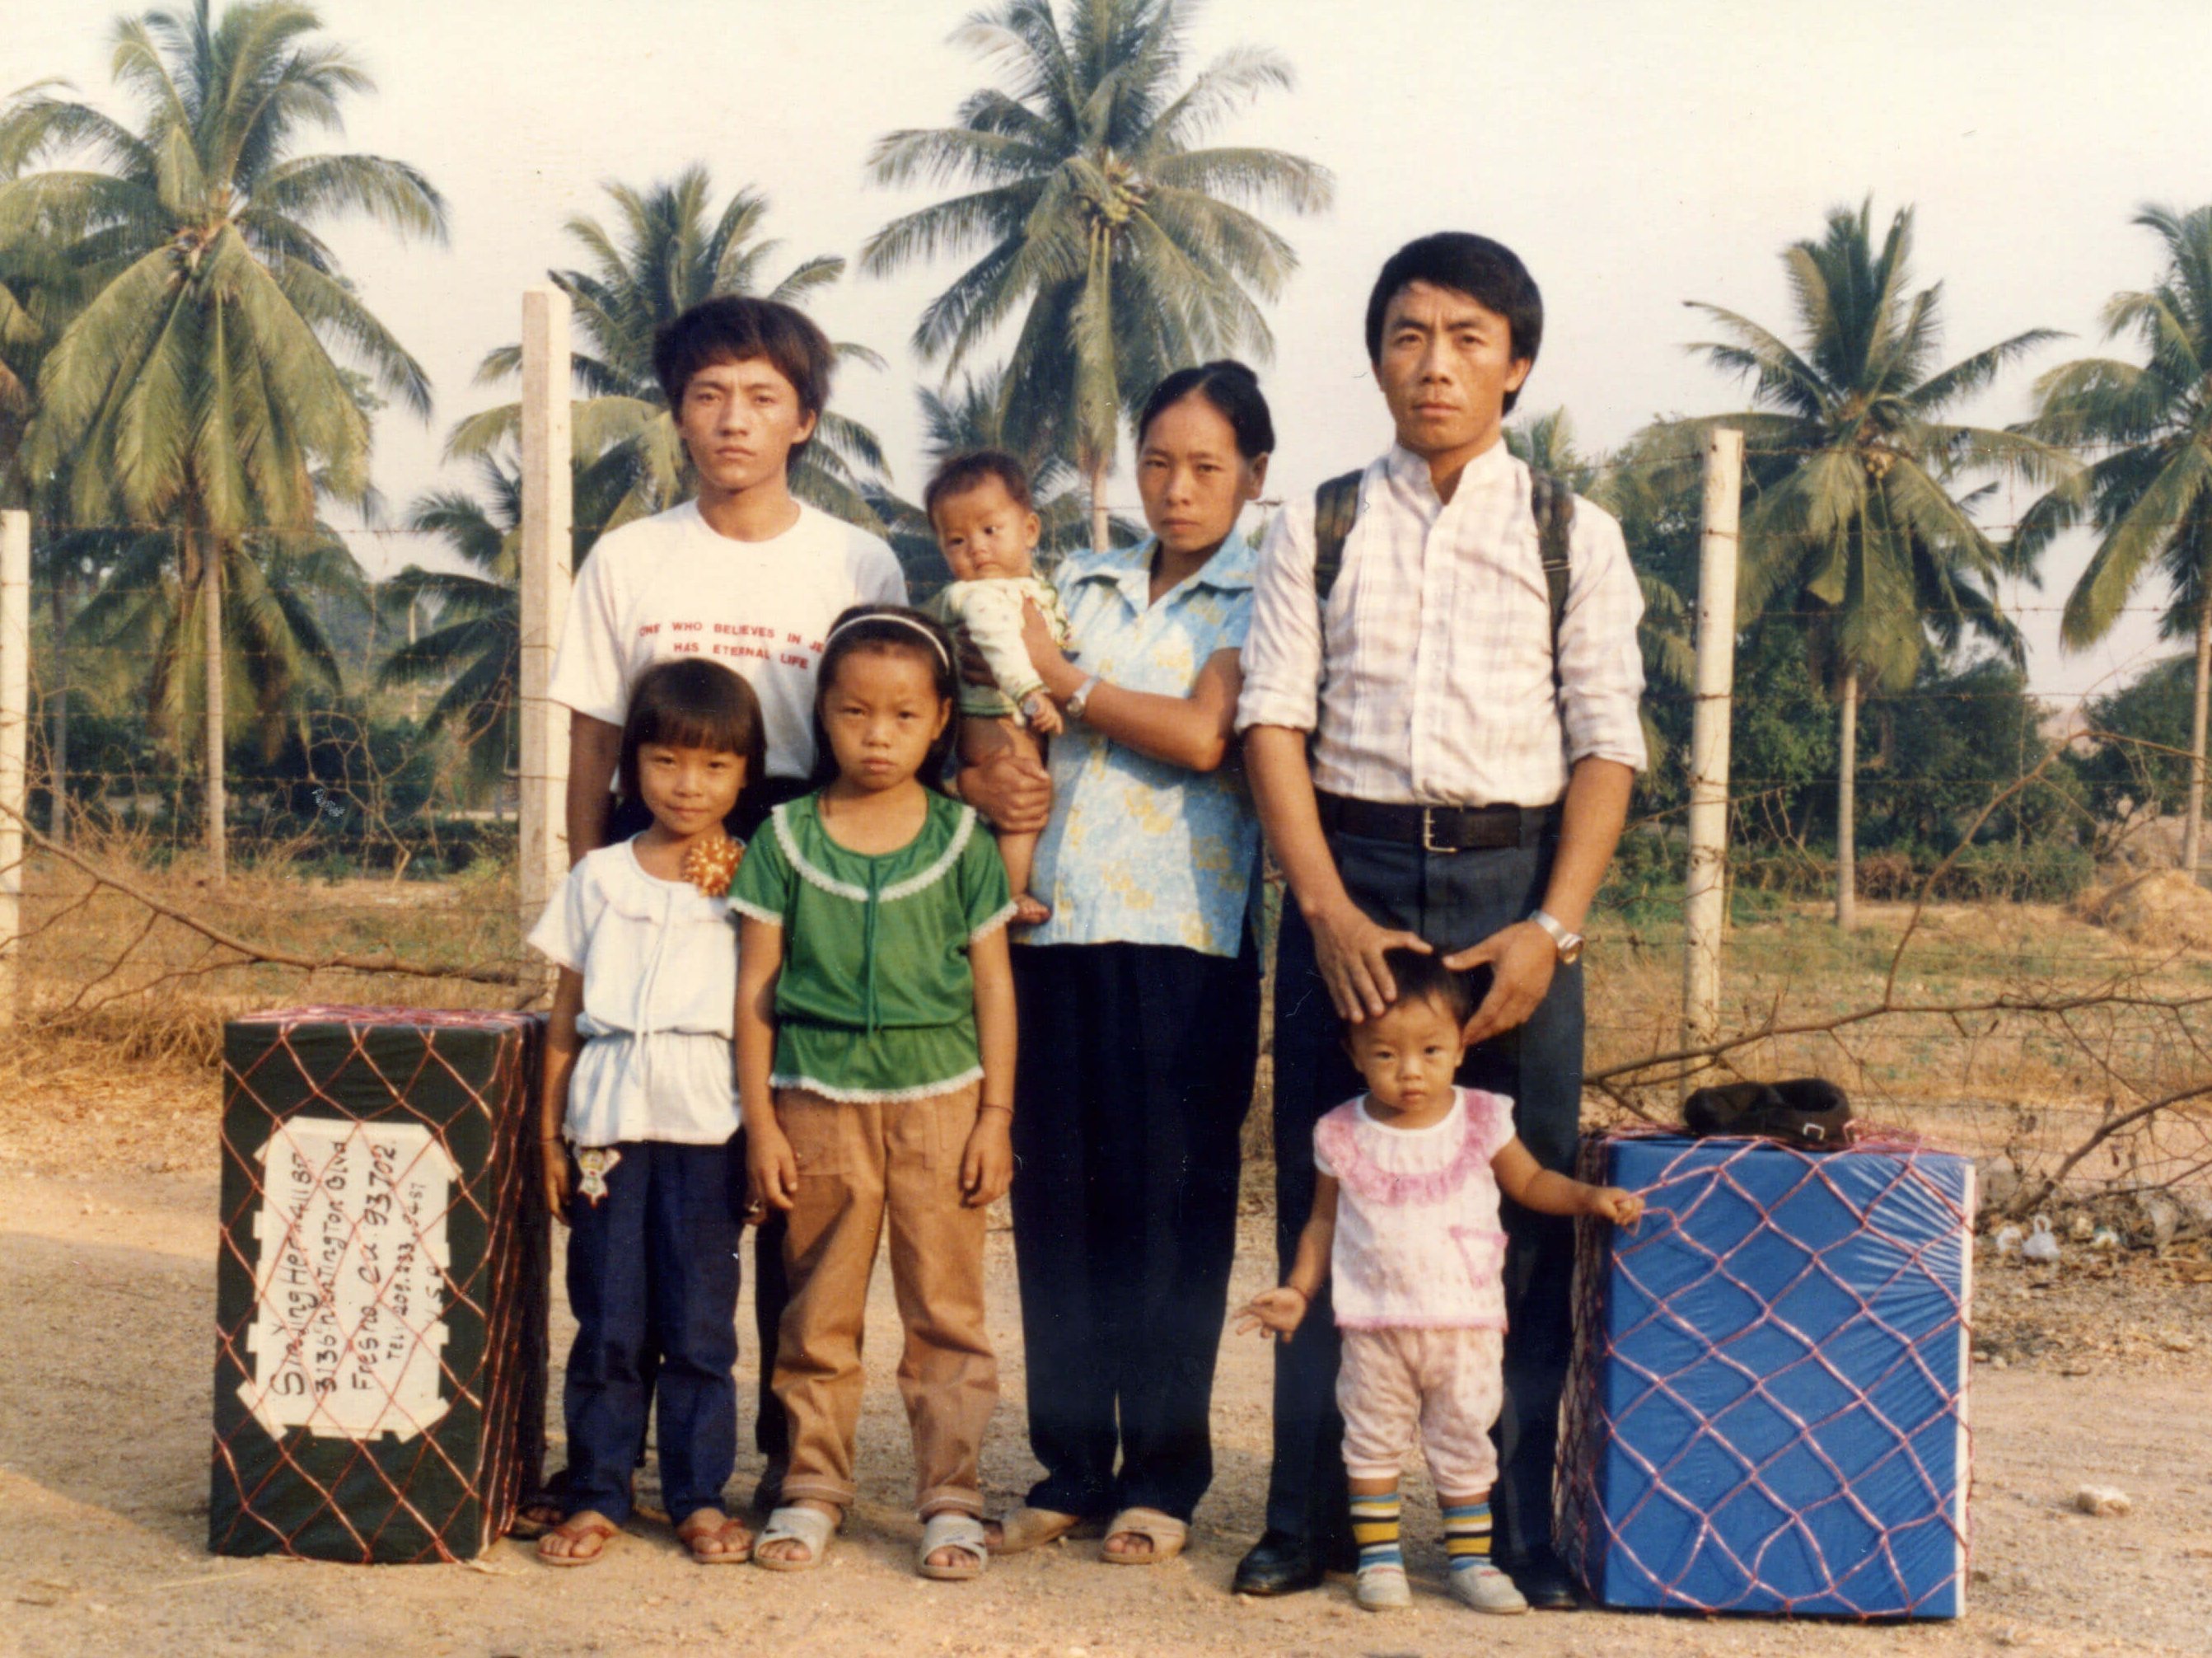 Portrait of a Hmong family of 7 standing outside in a tropical climate, luggage stacked on either side of them.